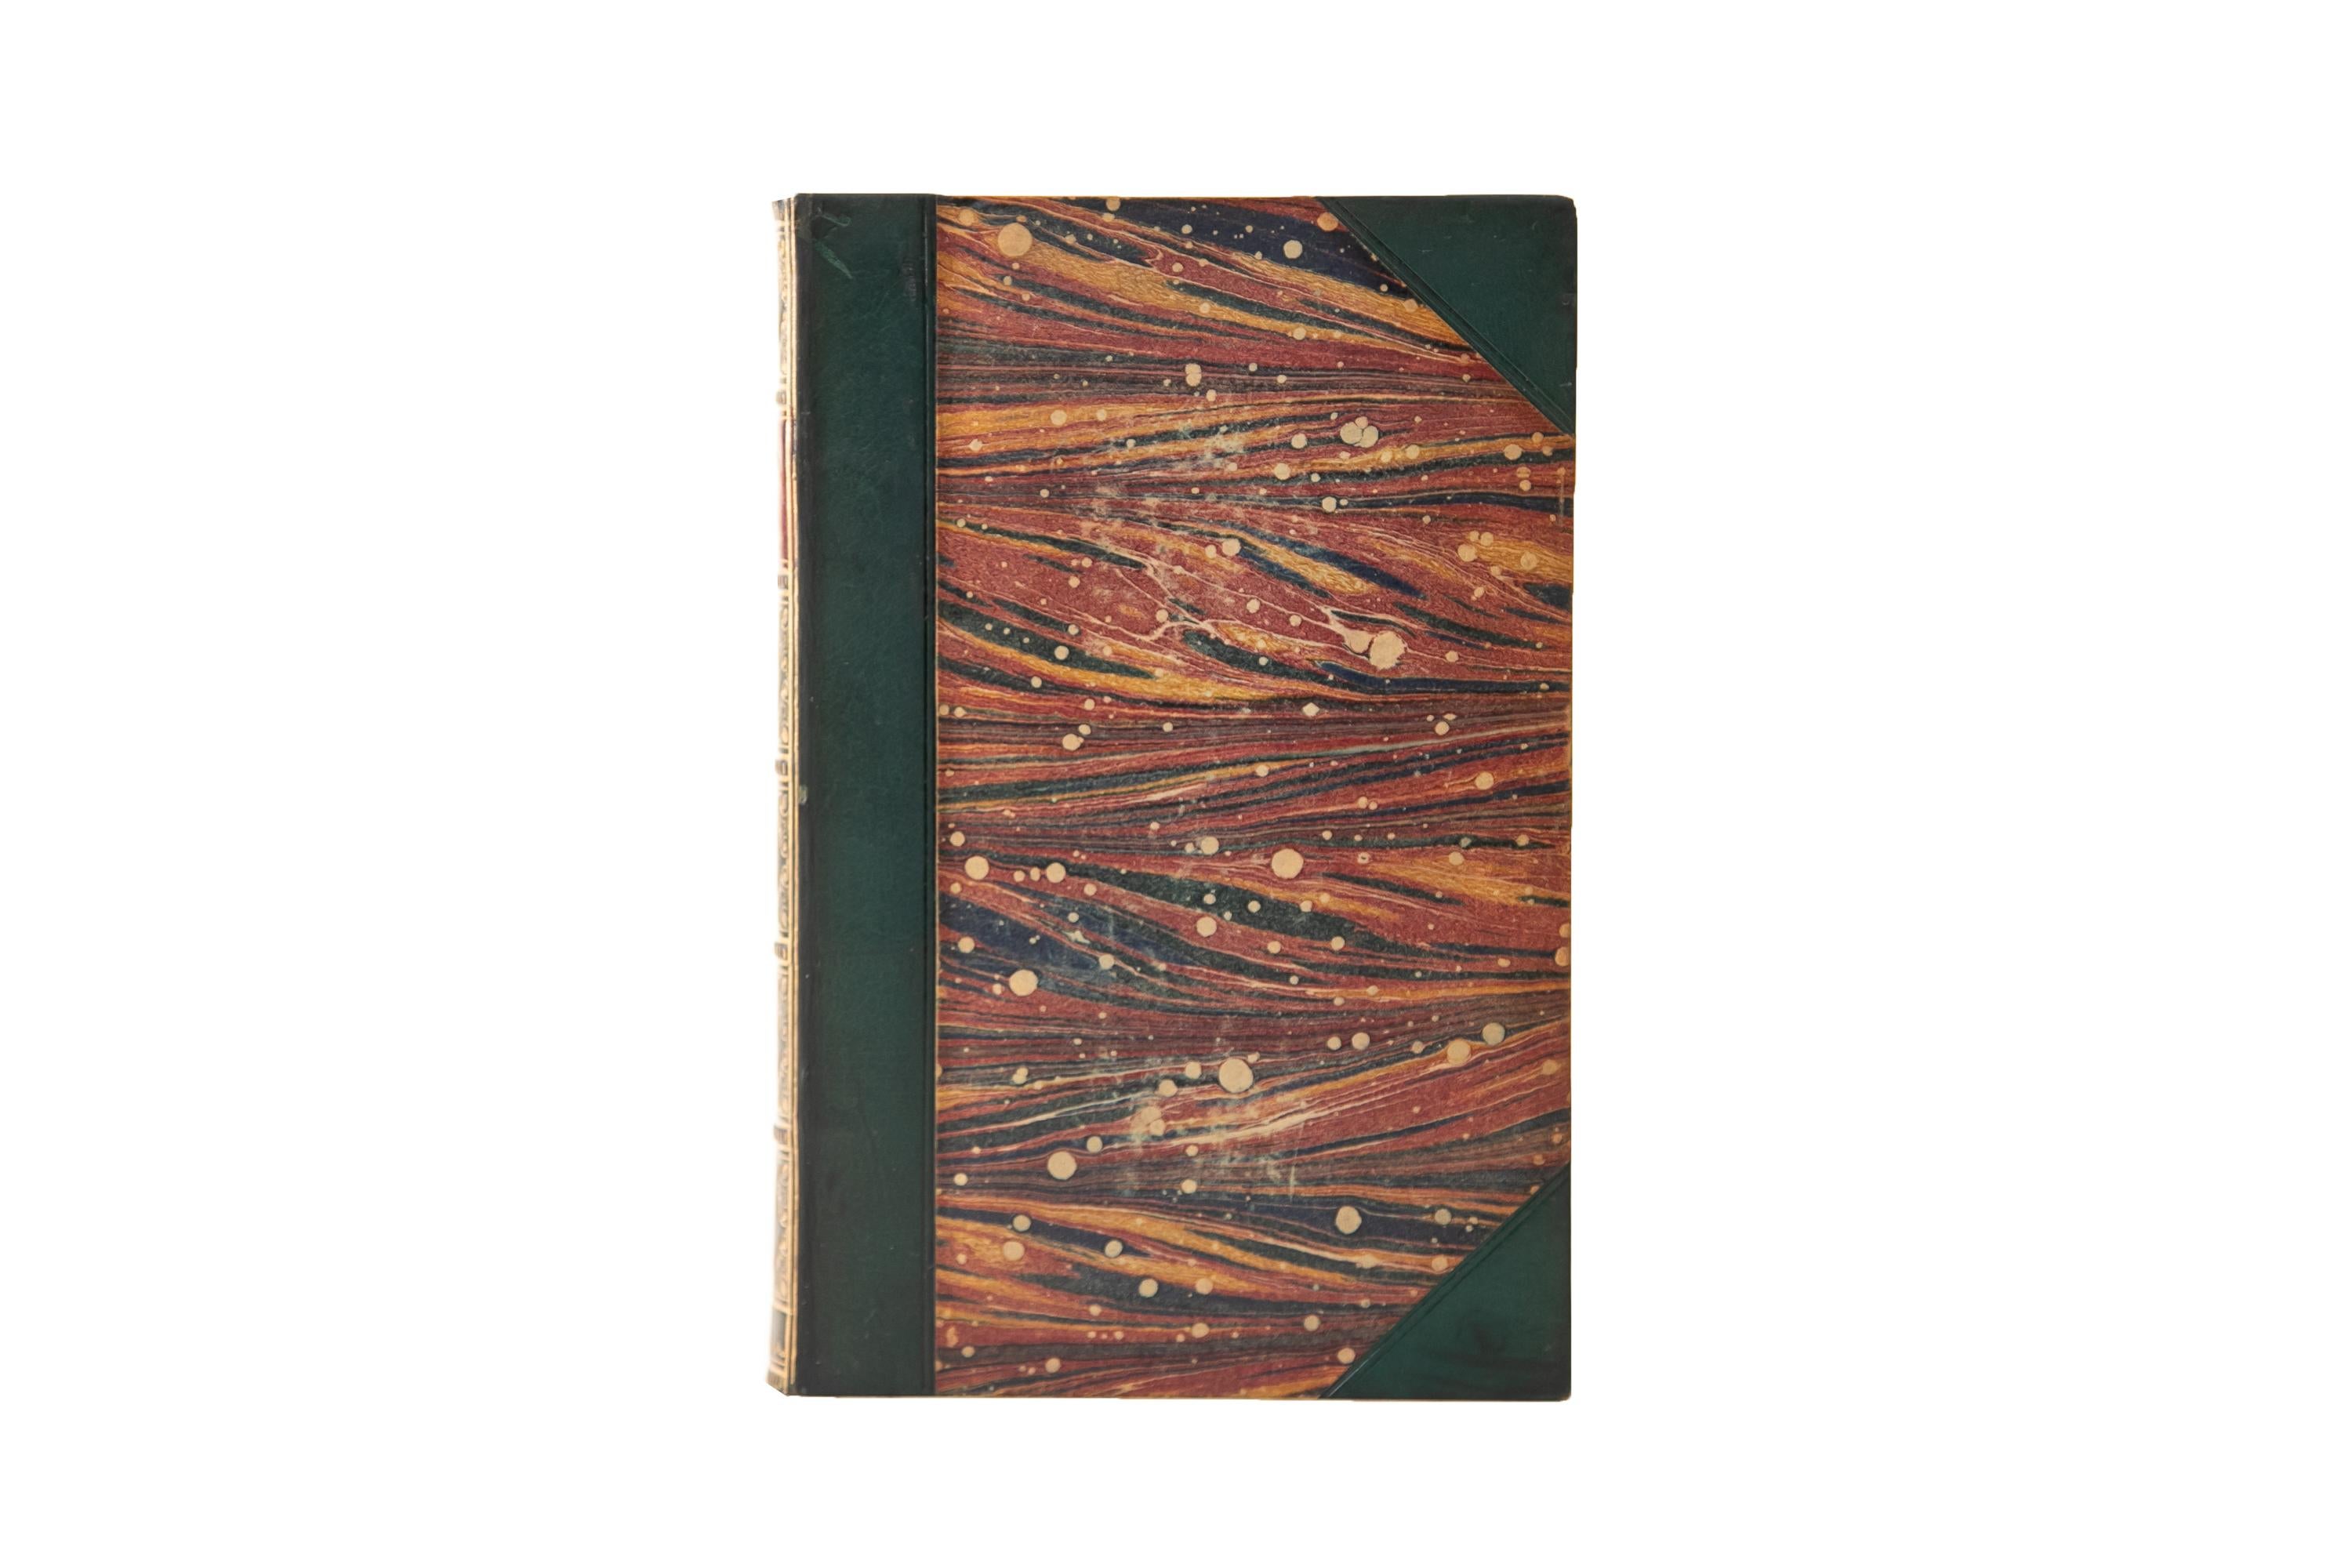 3 Volumes. Jonathan Swift, The Poetical Works. Bound in 3/4 green calf and marbled boards. The spines display raised bands, bordering, floral panel detailing, and label lettering, all gilt-tooled with the labels in red calf. All of the edges are